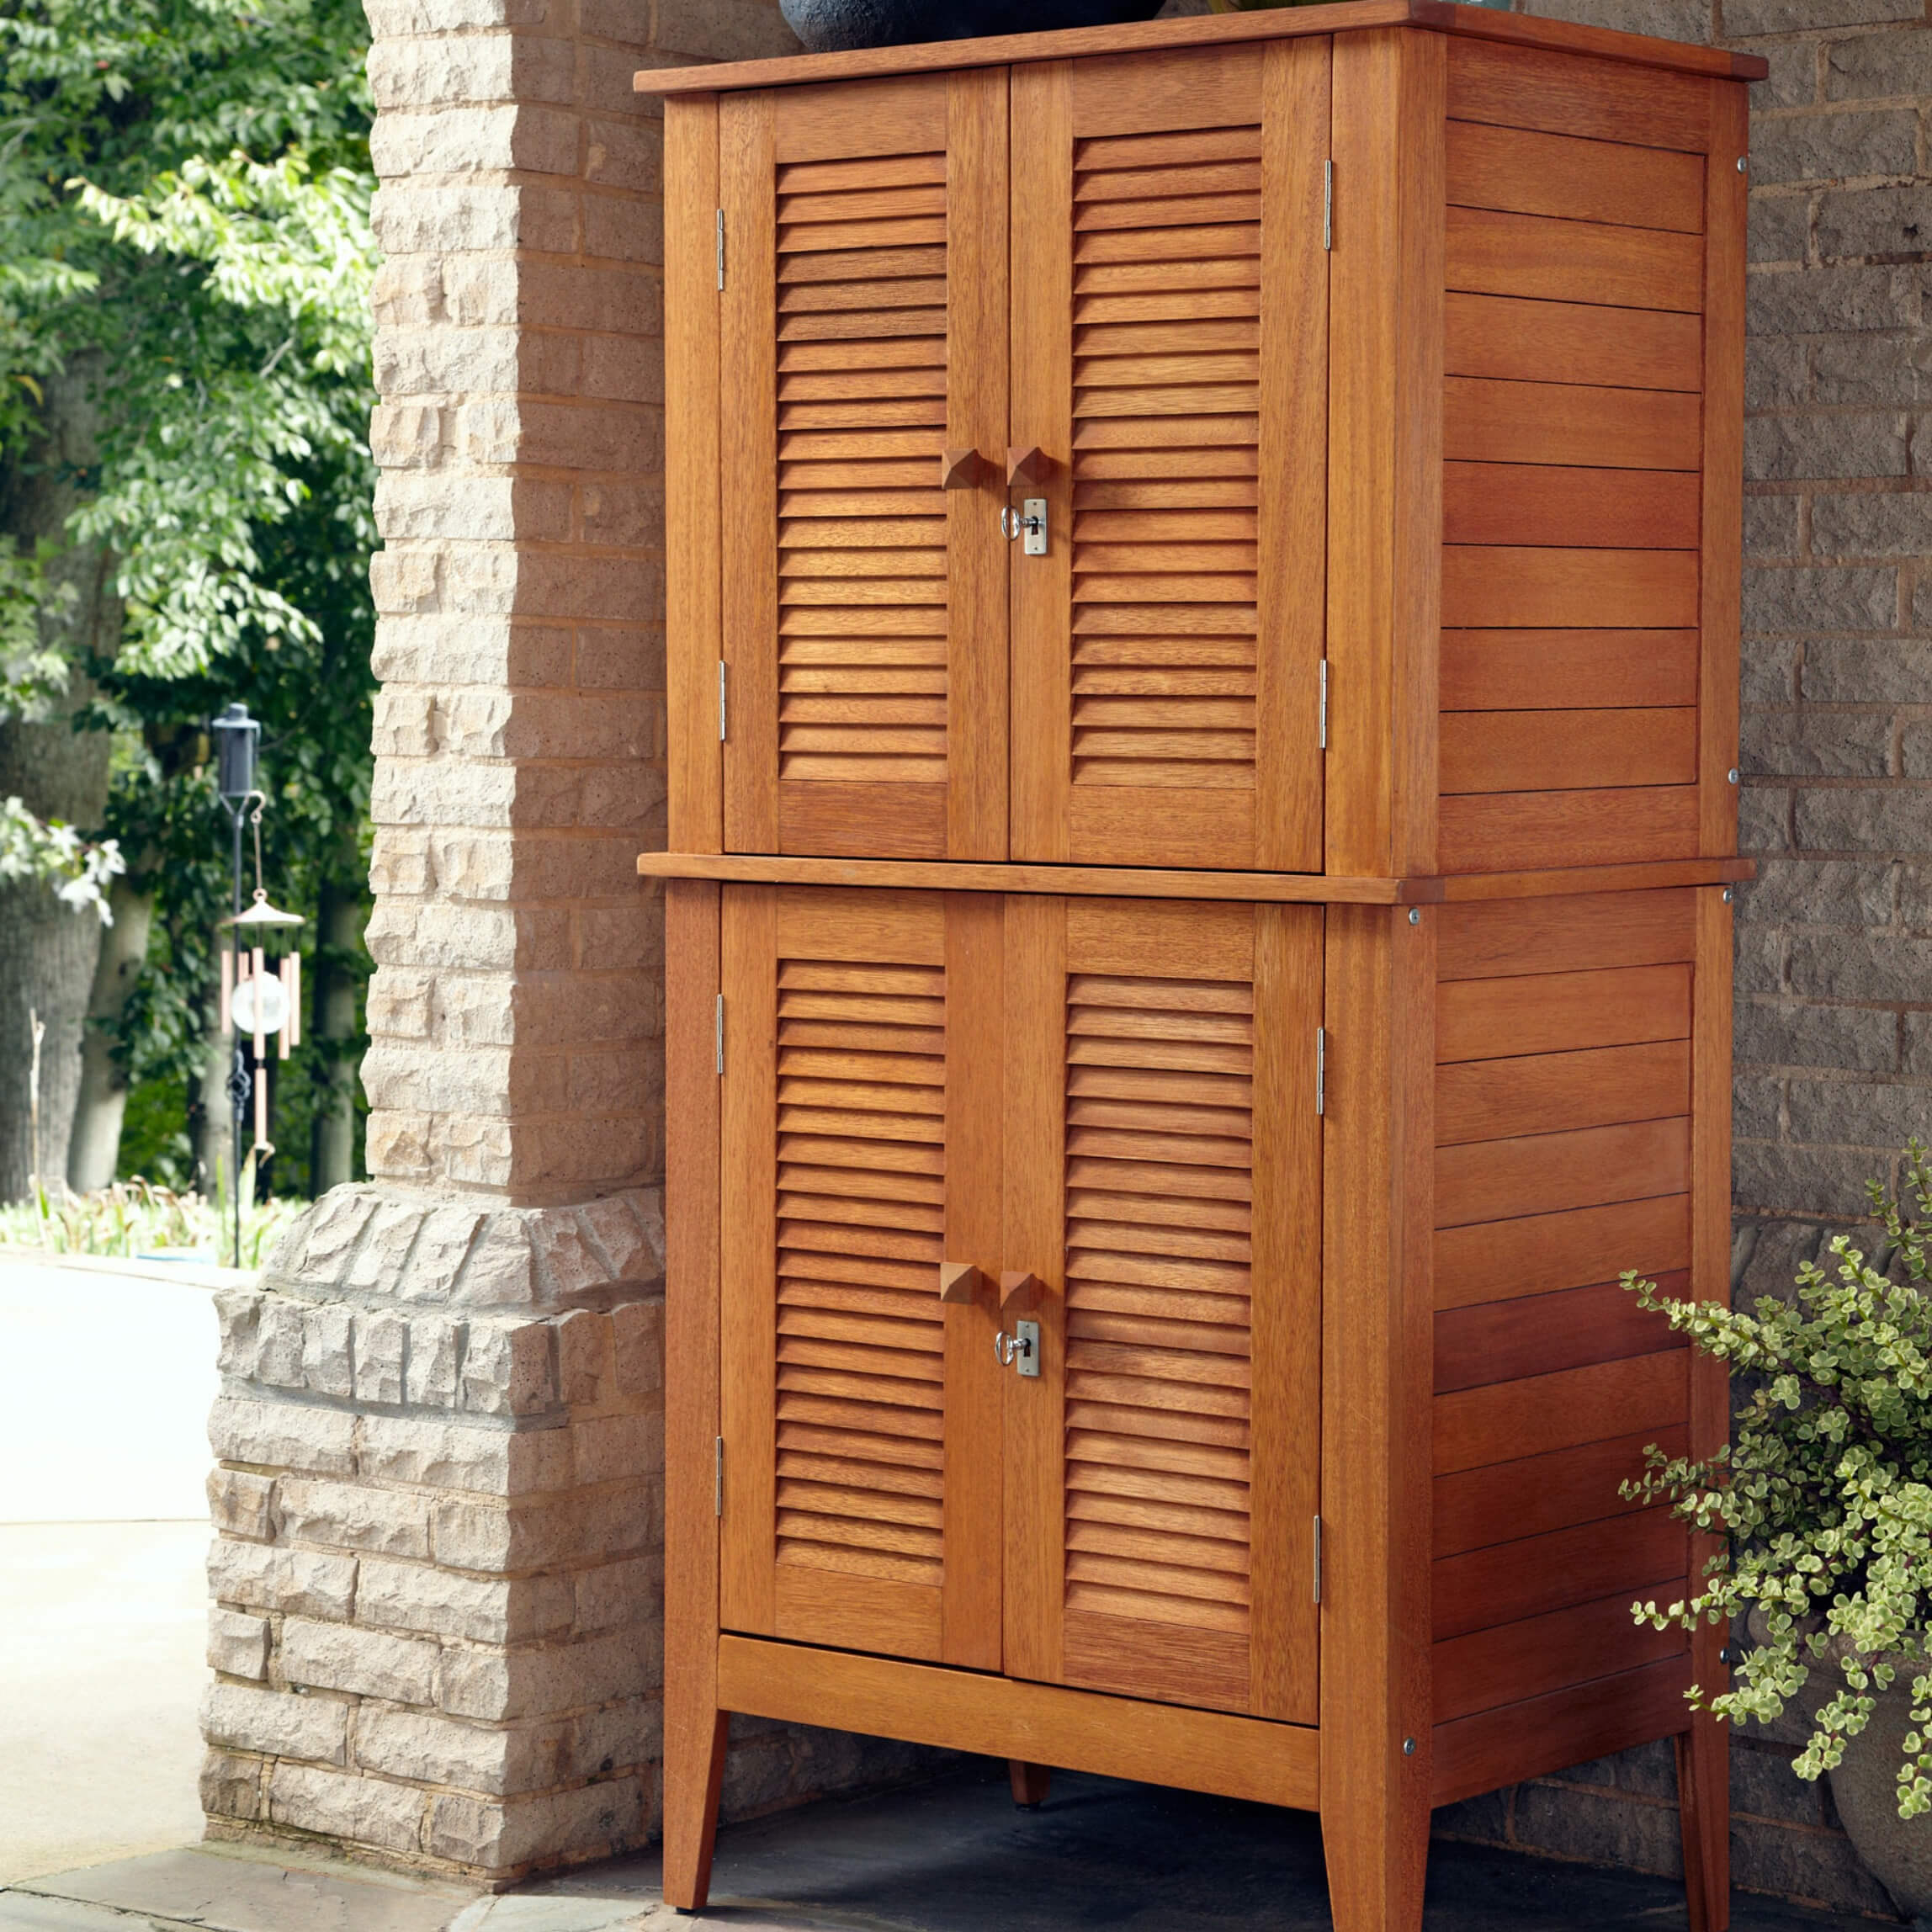 Top 10 Types Of Outdoor Deck Storage Boxes inside dimensions 2296 X 2296